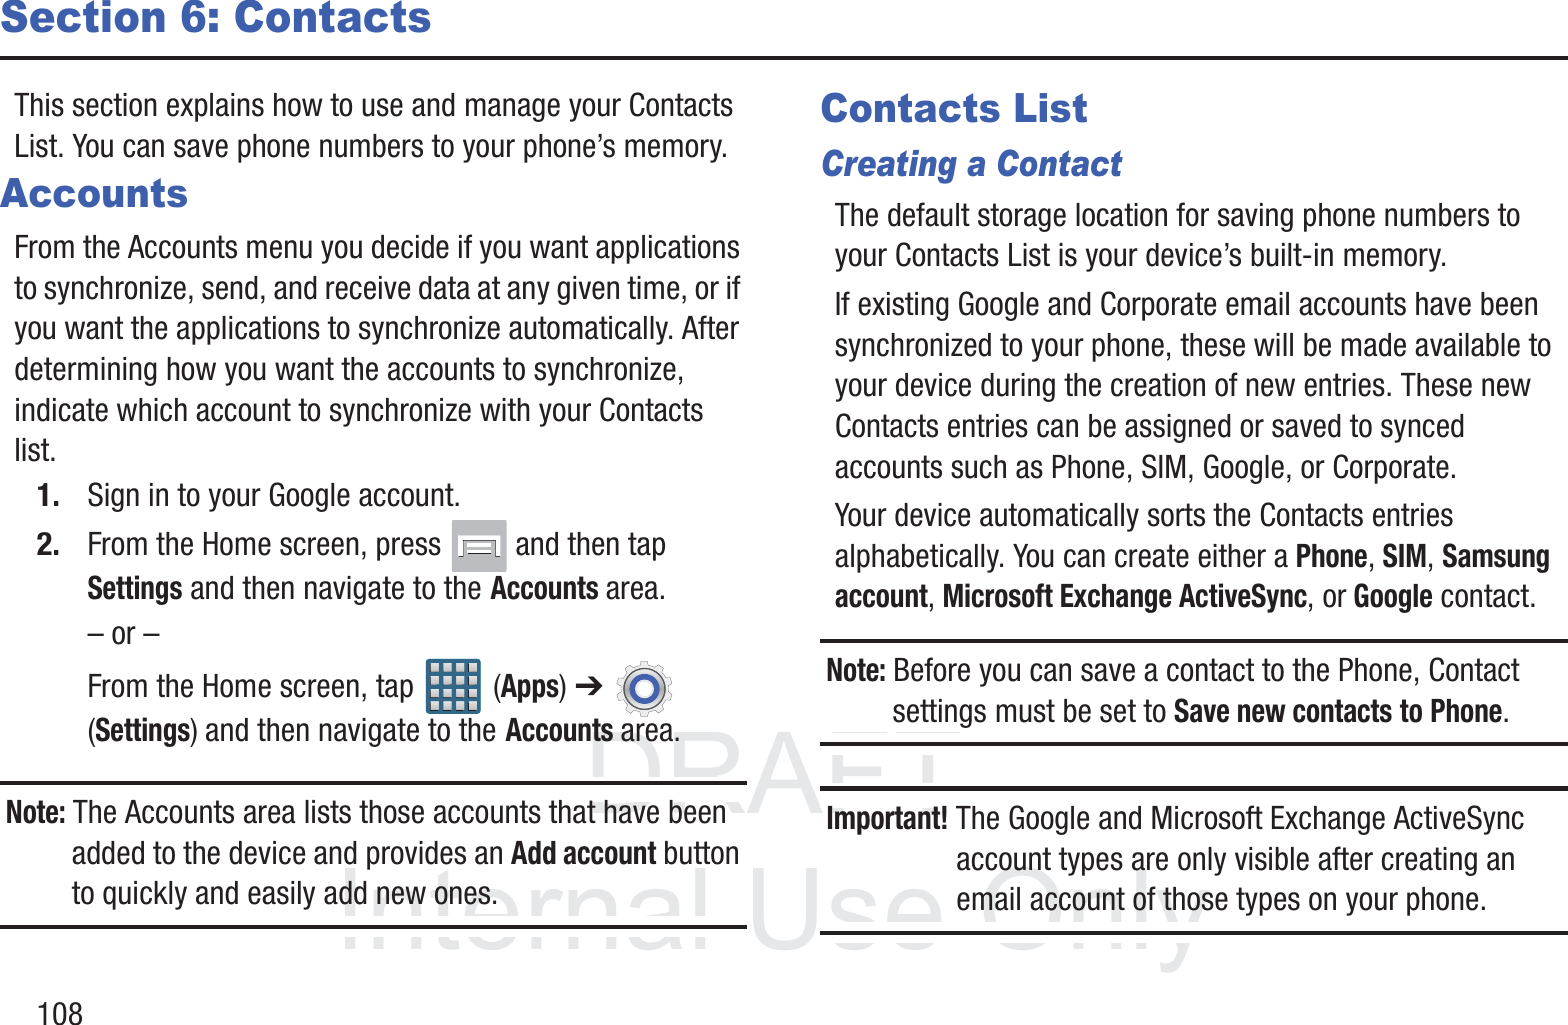 DRAFT InternalUse Only108Section 6: ContactsThis section explains how to use and manage your Contacts List. You can save phone numbers to your phone’s memory.AccountsFrom the Accounts menu you decide if you want applications to synchronize, send, and receive data at any given time, or if you want the applications to synchronize automatically. After determining how you want the accounts to synchronize, indicate which account to synchronize with your Contacts list.1. Sign in to your Google account.2. From the Home screen, press   and then tap Settings and then navigate to the Accounts area.– or –From the Home screen, tap   (Apps) ➔ (Settings) and then navigate to the Accounts area.Note: The Accounts area lists those accounts that have been added to the device and provides an Add account button to quickly and easily add new ones.Contacts ListCreating a ContactThe default storage location for saving phone numbers to your Contacts List is your device’s built-in memory. If existing Google and Corporate email accounts have been synchronized to your phone, these will be made available to your device during the creation of new entries. These new Contacts entries can be assigned or saved to synced accounts such as Phone, SIM, Google, or Corporate.Your device automatically sorts the Contacts entries alphabetically. You can create either a Phone, SIM, Samsung account, Microsoft Exchange ActiveSync, or Google contact.Note: Before you can save a contact to the Phone, Contact settings must be set to Save new contacts to Phone. Important! The Google and Microsoft Exchange ActiveSync account types are only visible after creating an email account of those types on your phone.